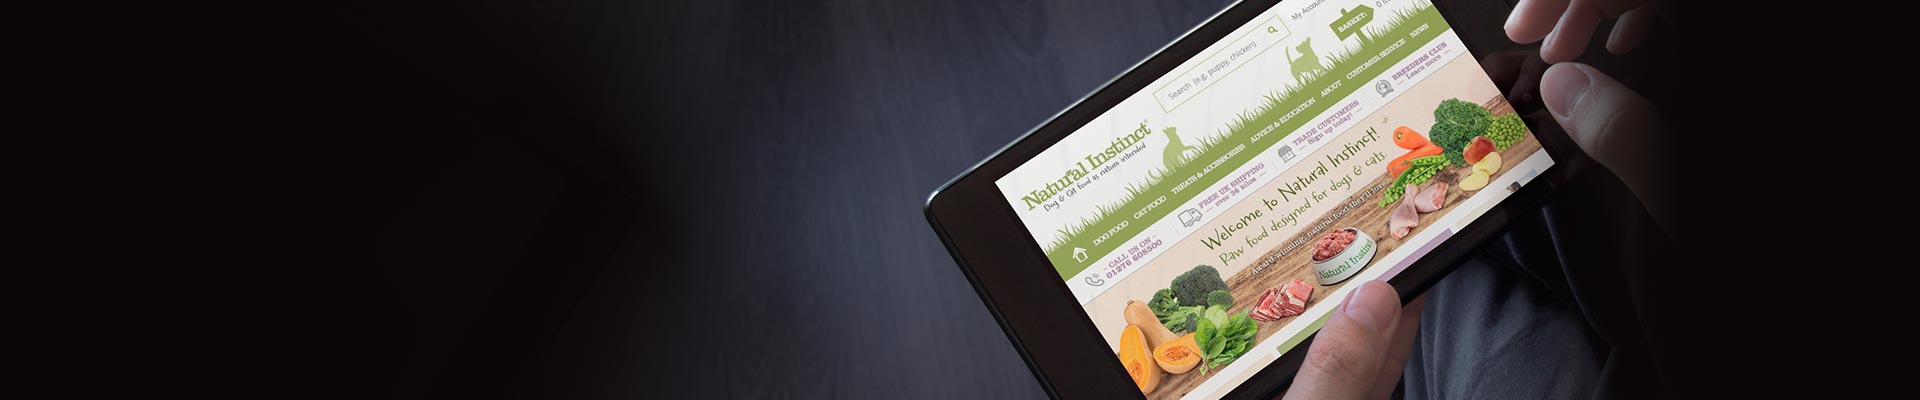 eCommerce, fully responsive website solution using magento for Natural Instinct